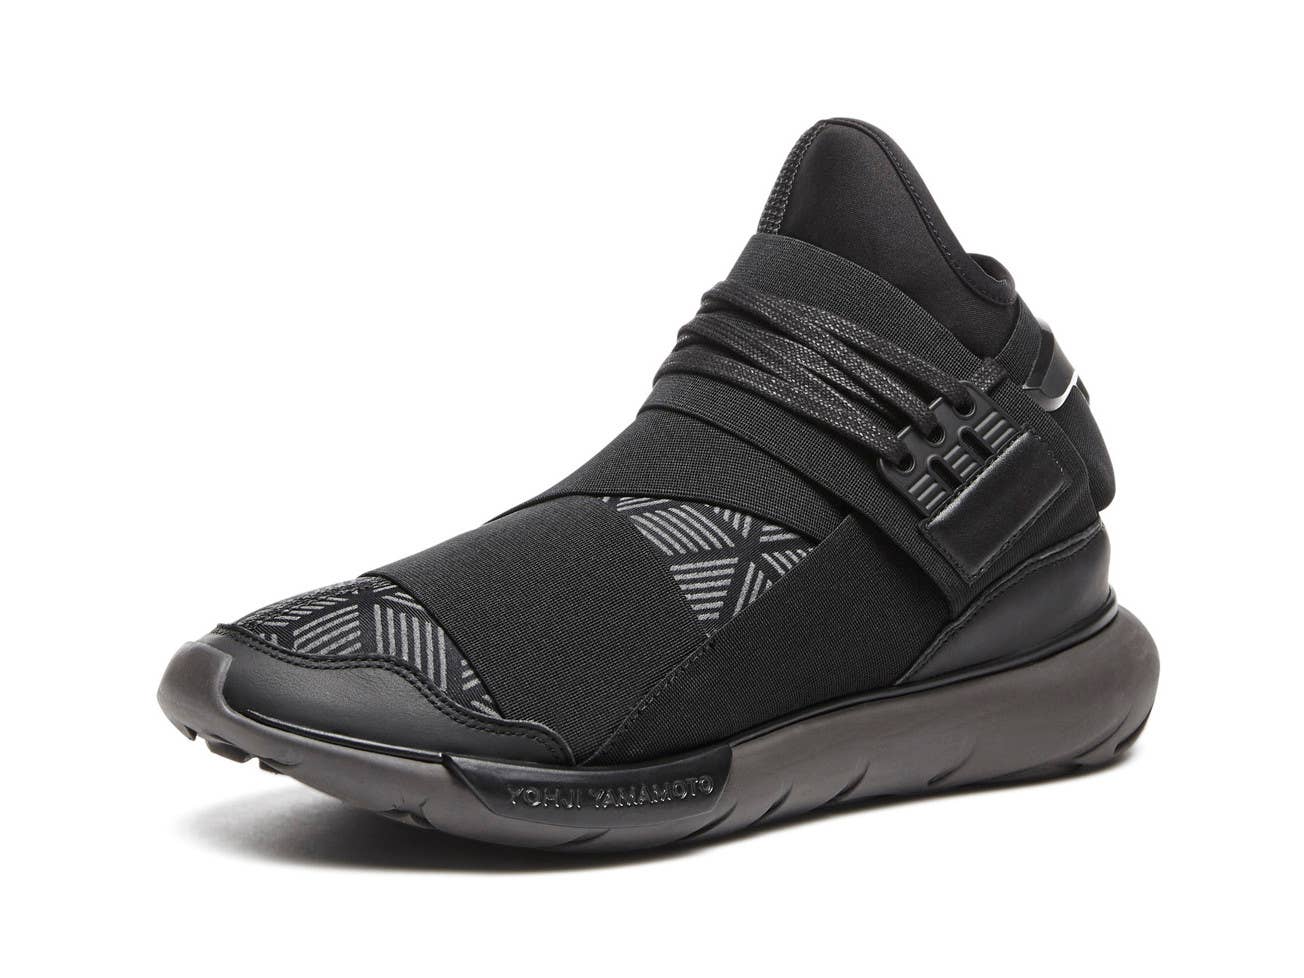 regeringstid kedelig uddannelse Adidas Y-3 Launches Futuristic Sneaker Collection | Complex